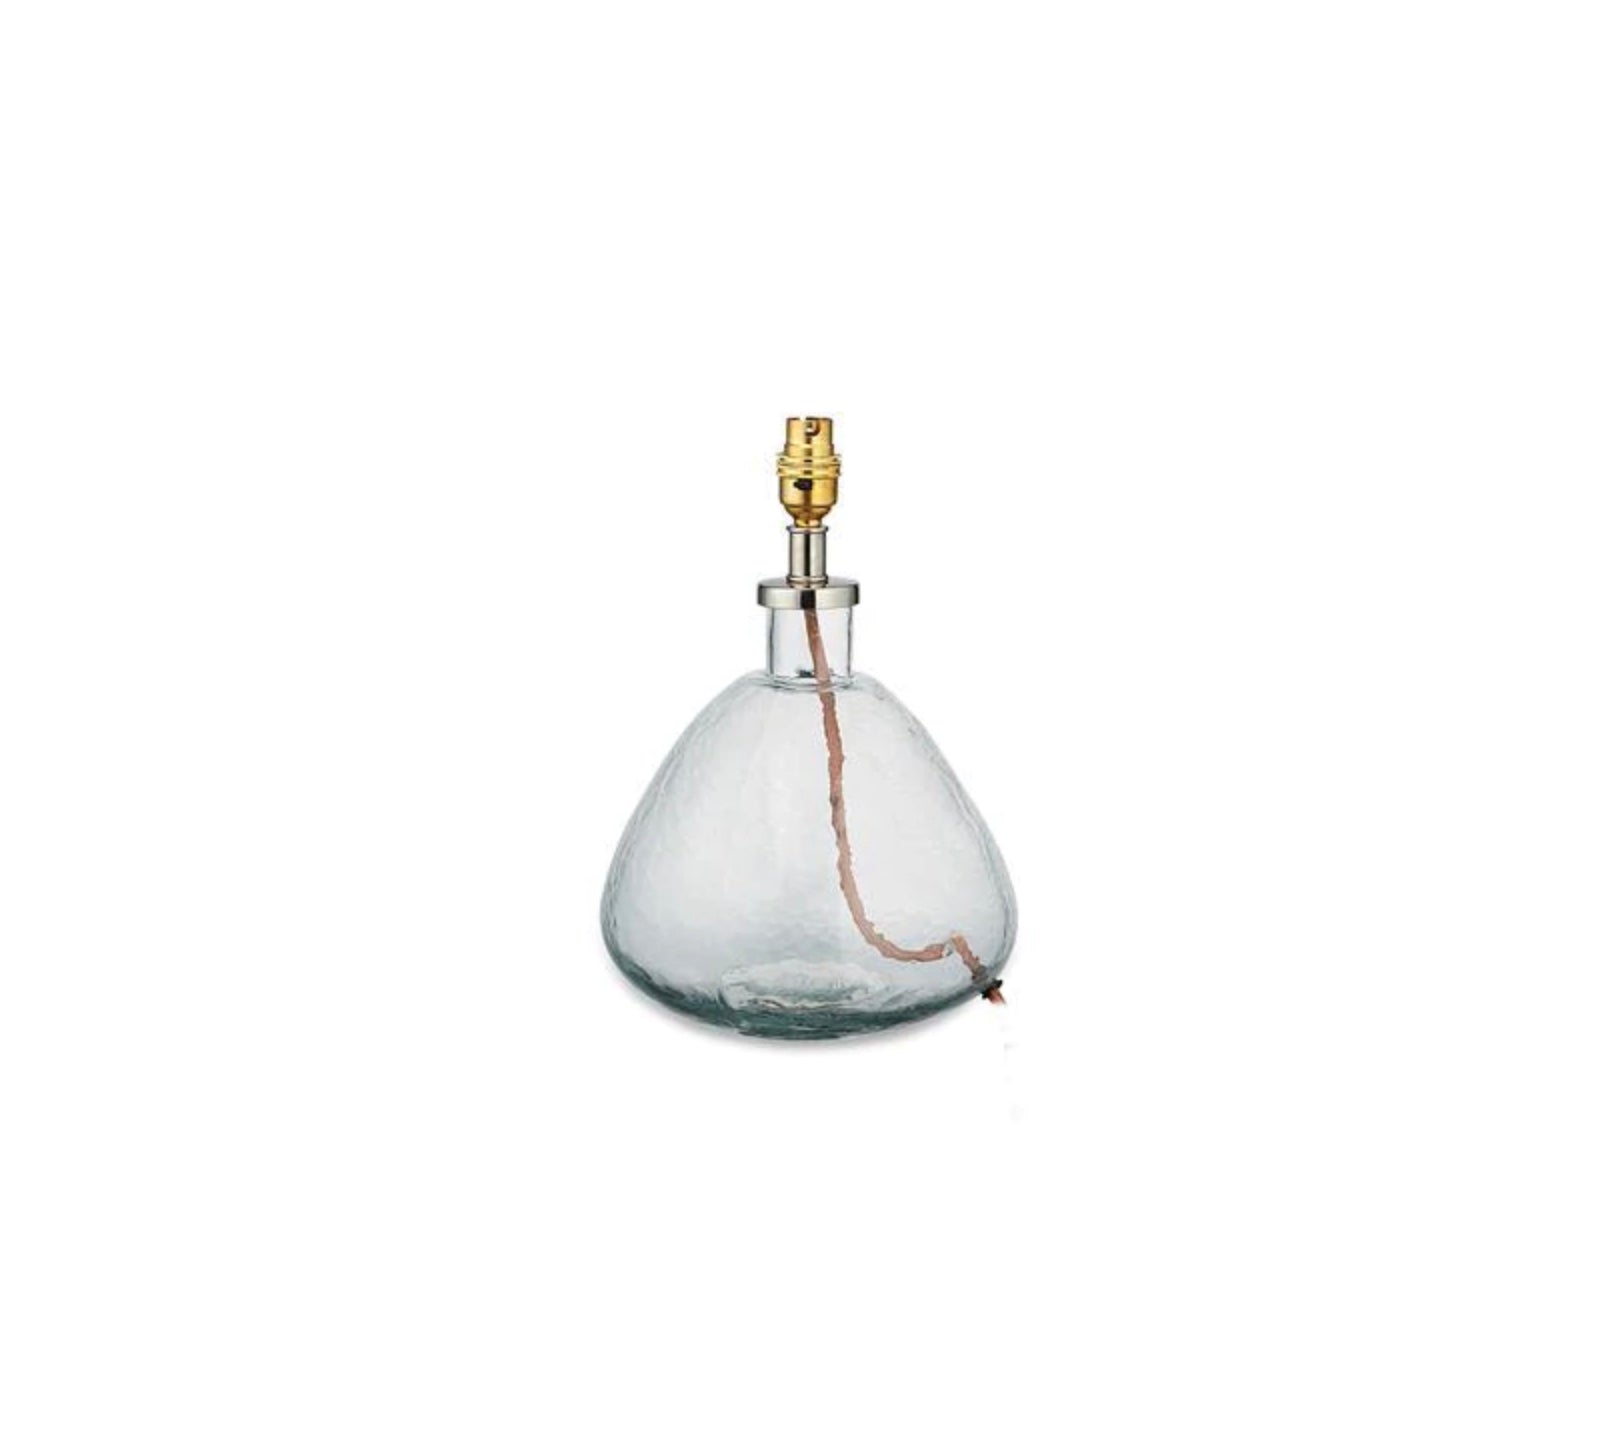 Nkuku Small Wide Clear Glass Baba Lamp with Small Dia Jute Lampshade